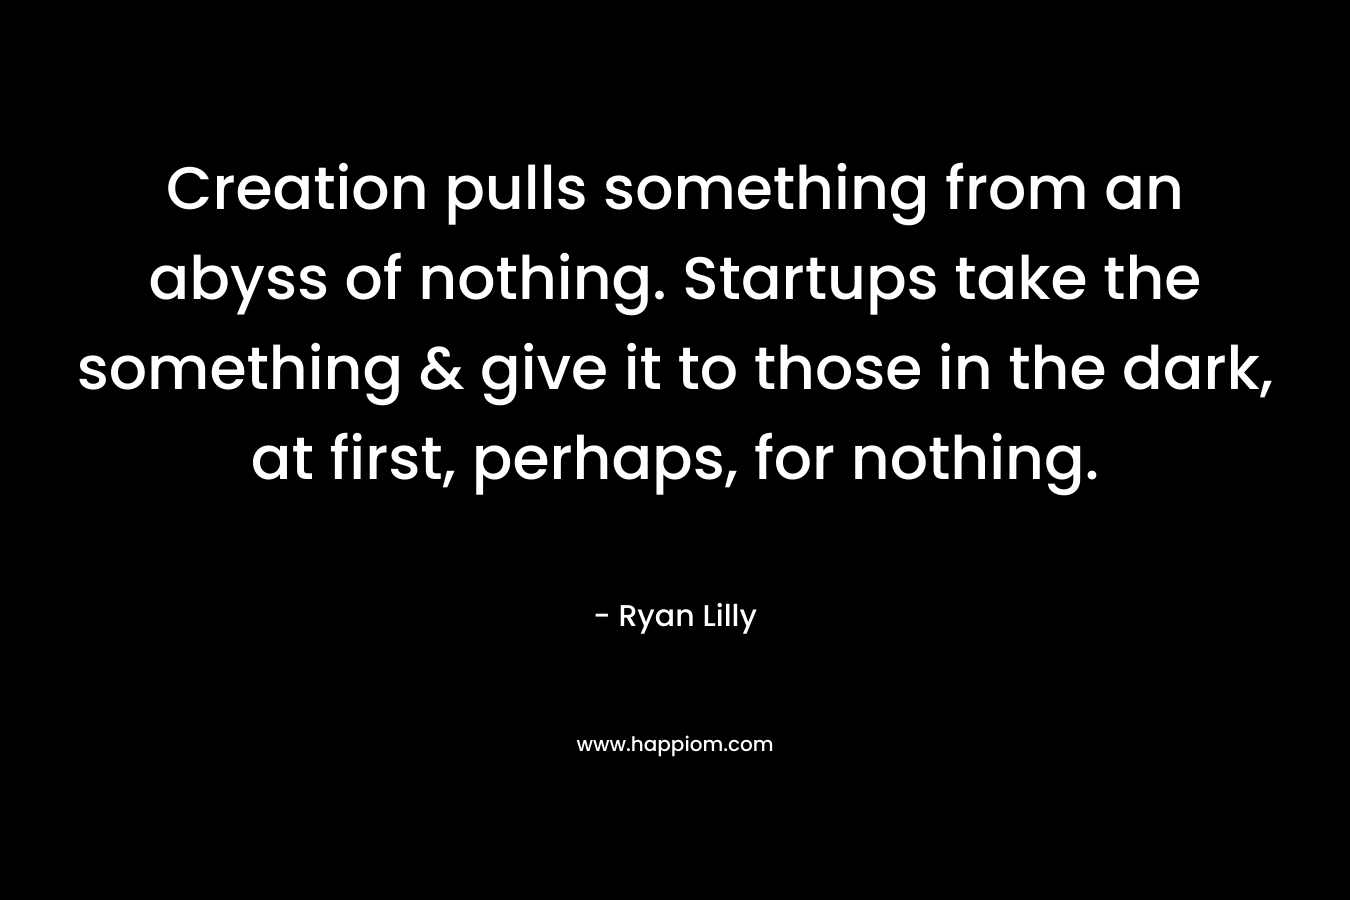 Creation pulls something from an abyss of nothing. Startups take the something & give it to those in the dark, at first, perhaps, for nothing. – Ryan Lilly